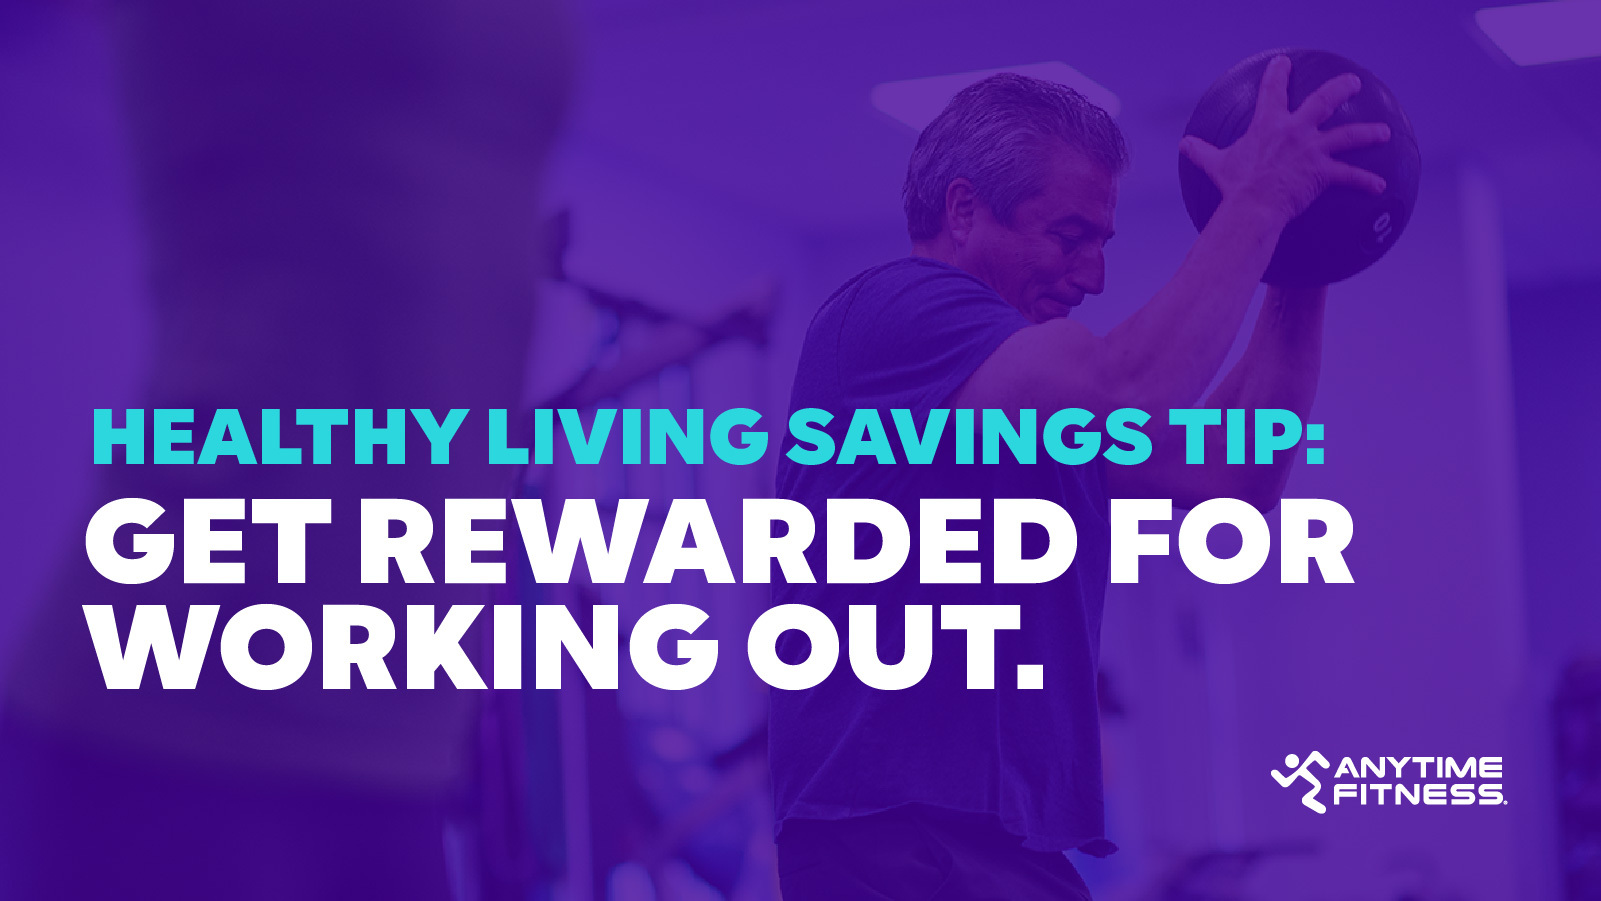 Anytime Fitness Durand IL 426 N Center St, Durand Illinois 61024